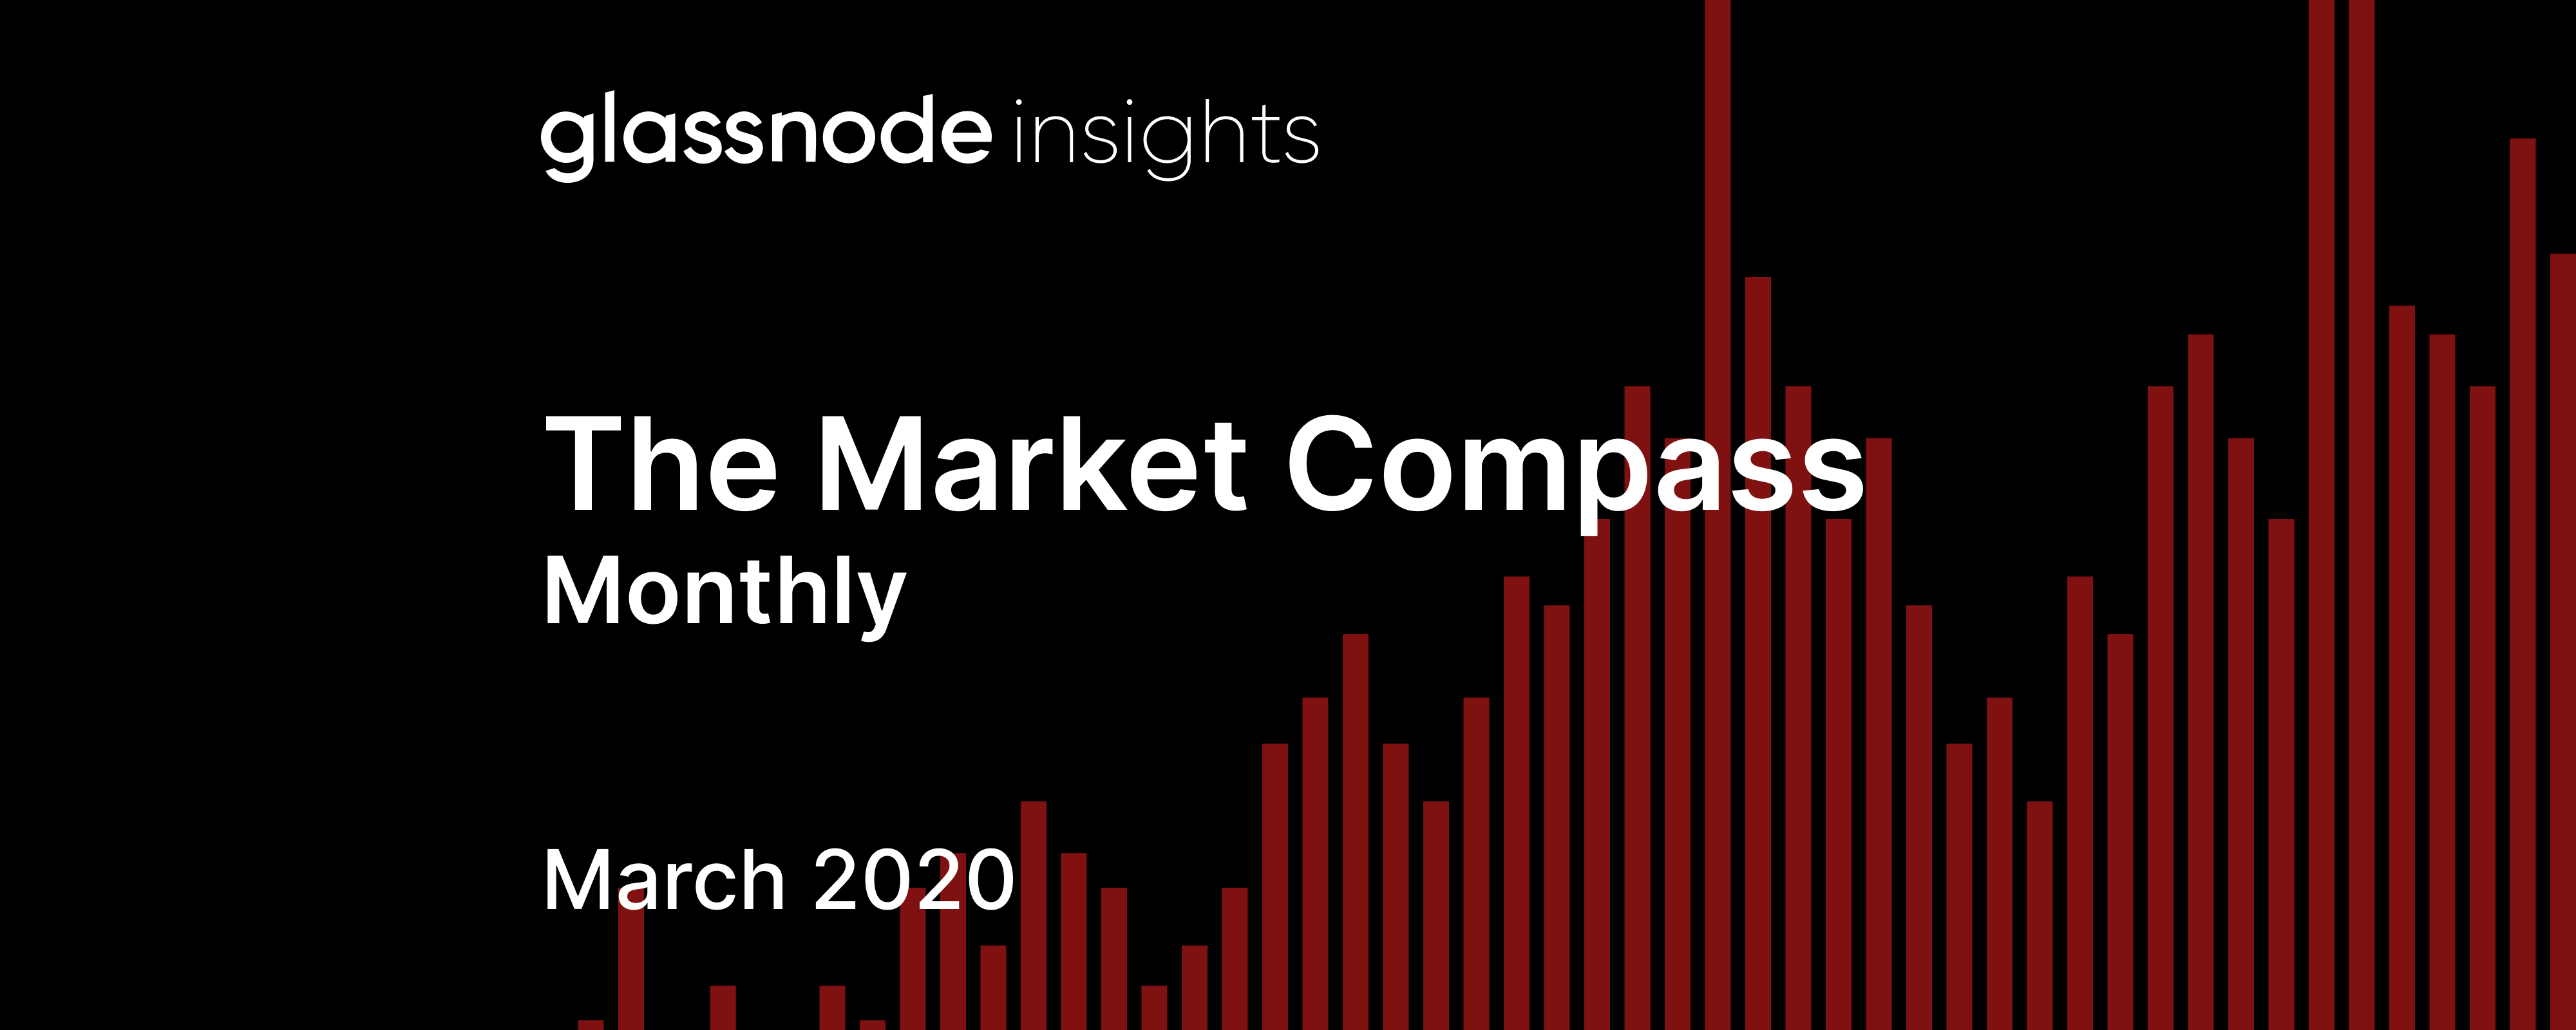 The Market Compass (March 2020)